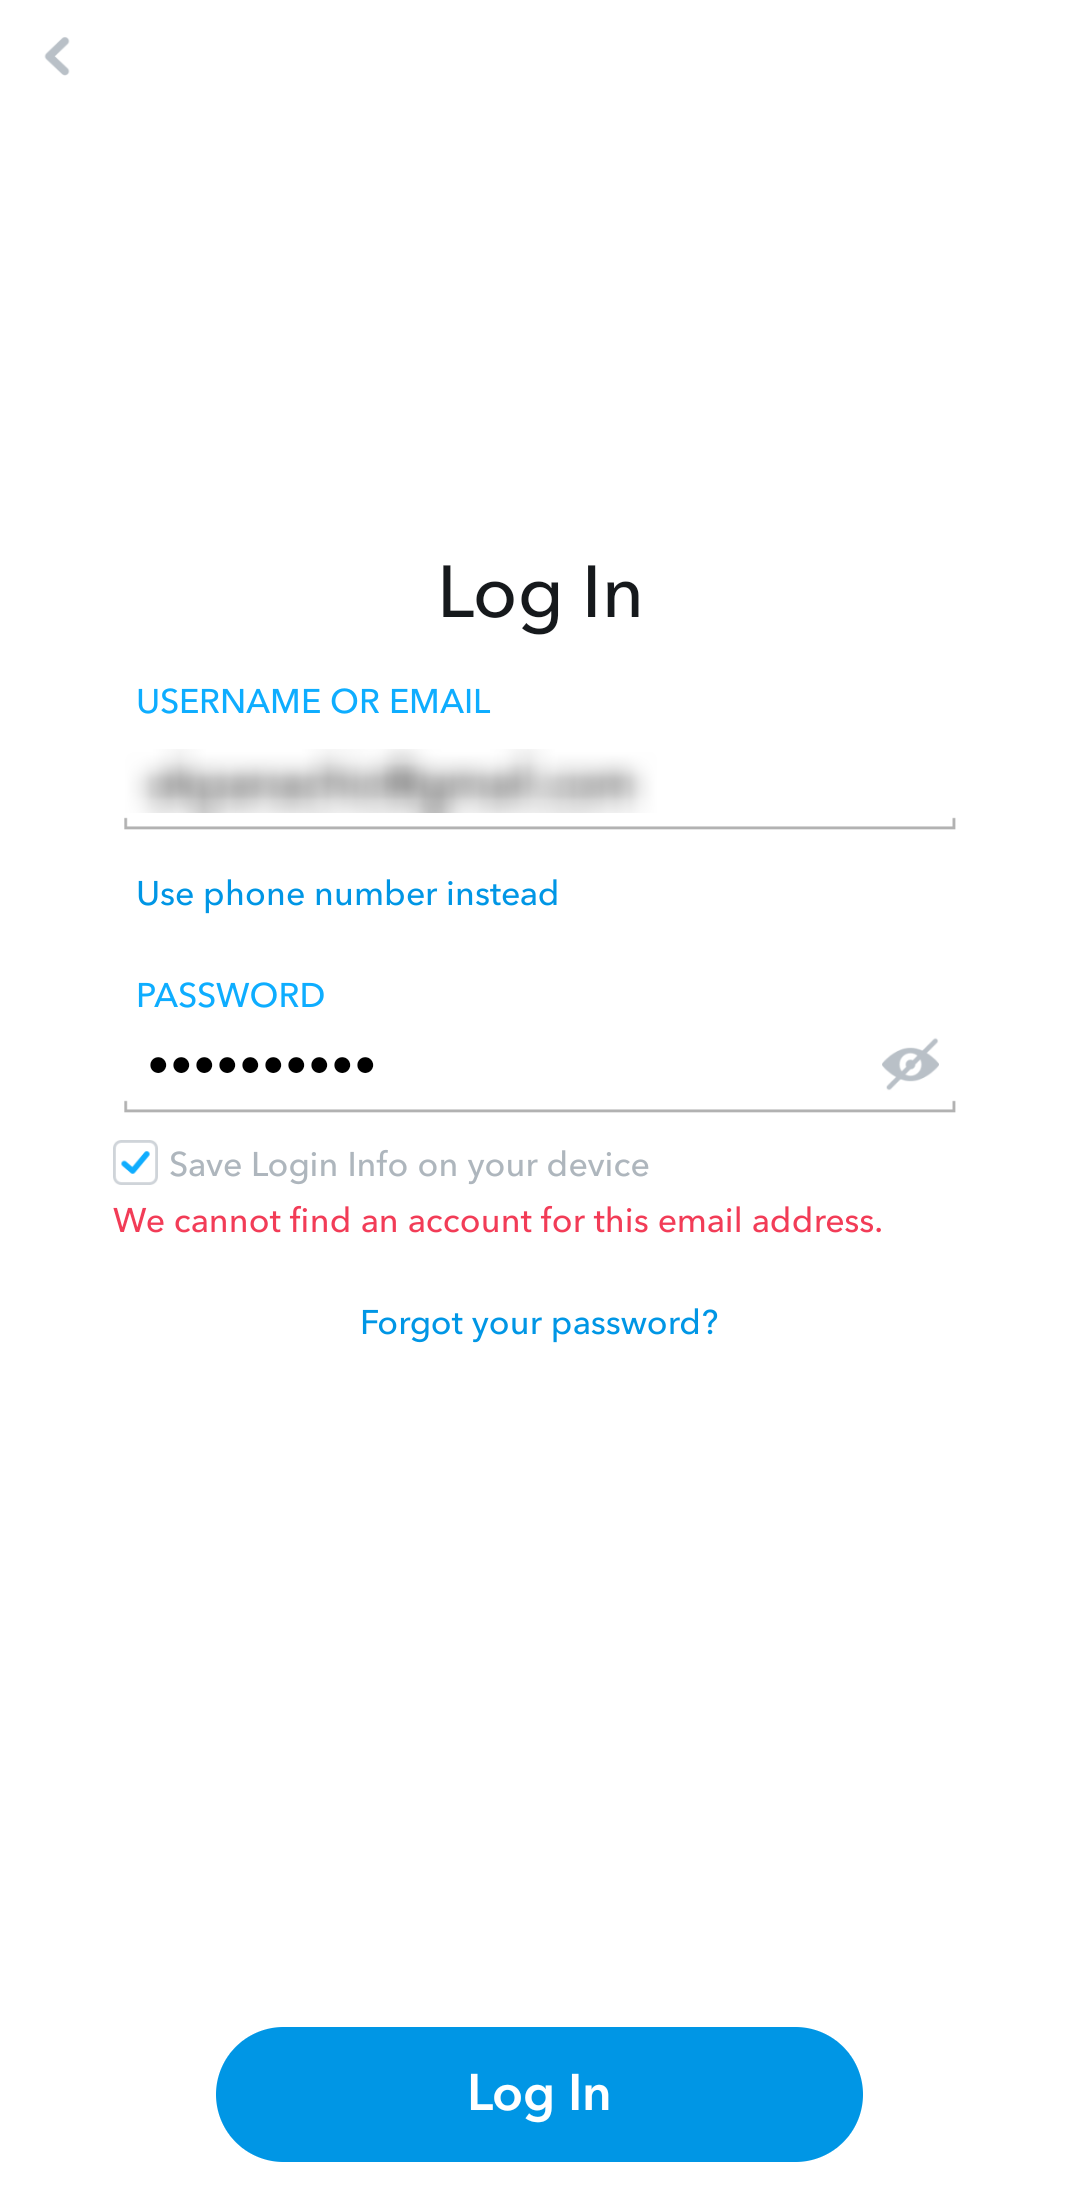 Failed Snapchat account reactivation with email address